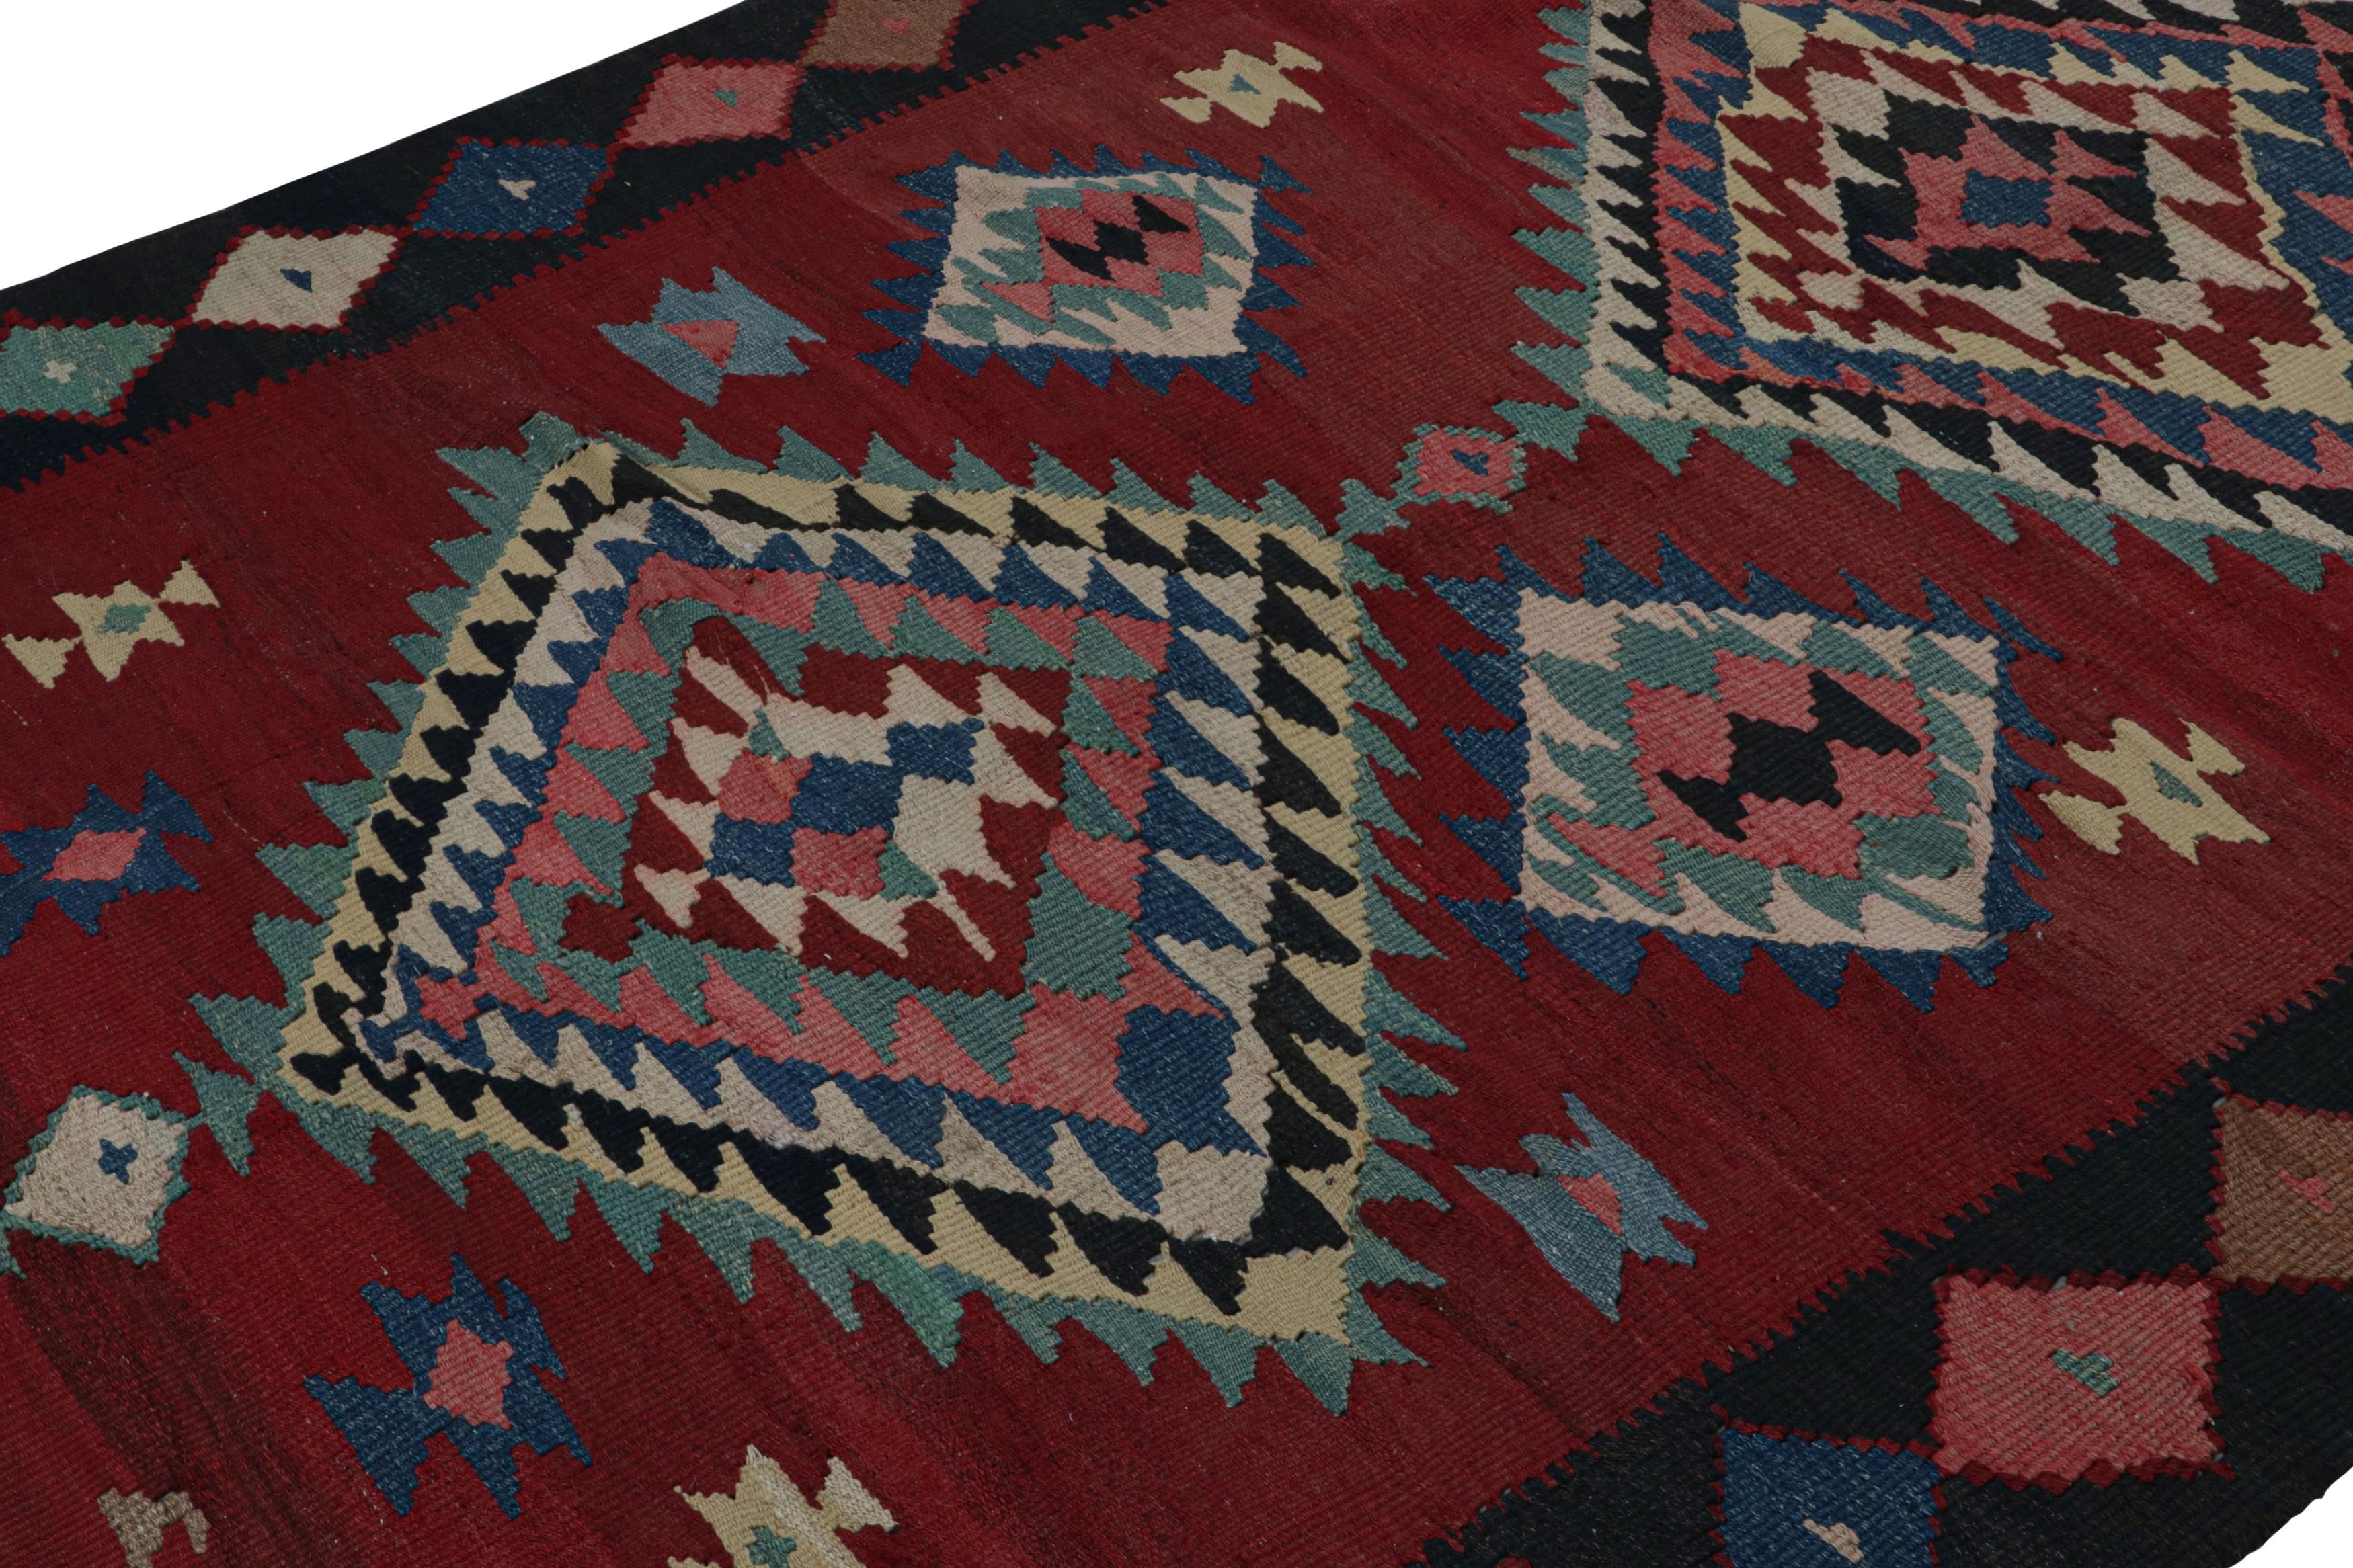 Hand-Woven Vintage tribal Afghan Kilim rug, with Geometric Patterns, from Rug & Kilim For Sale